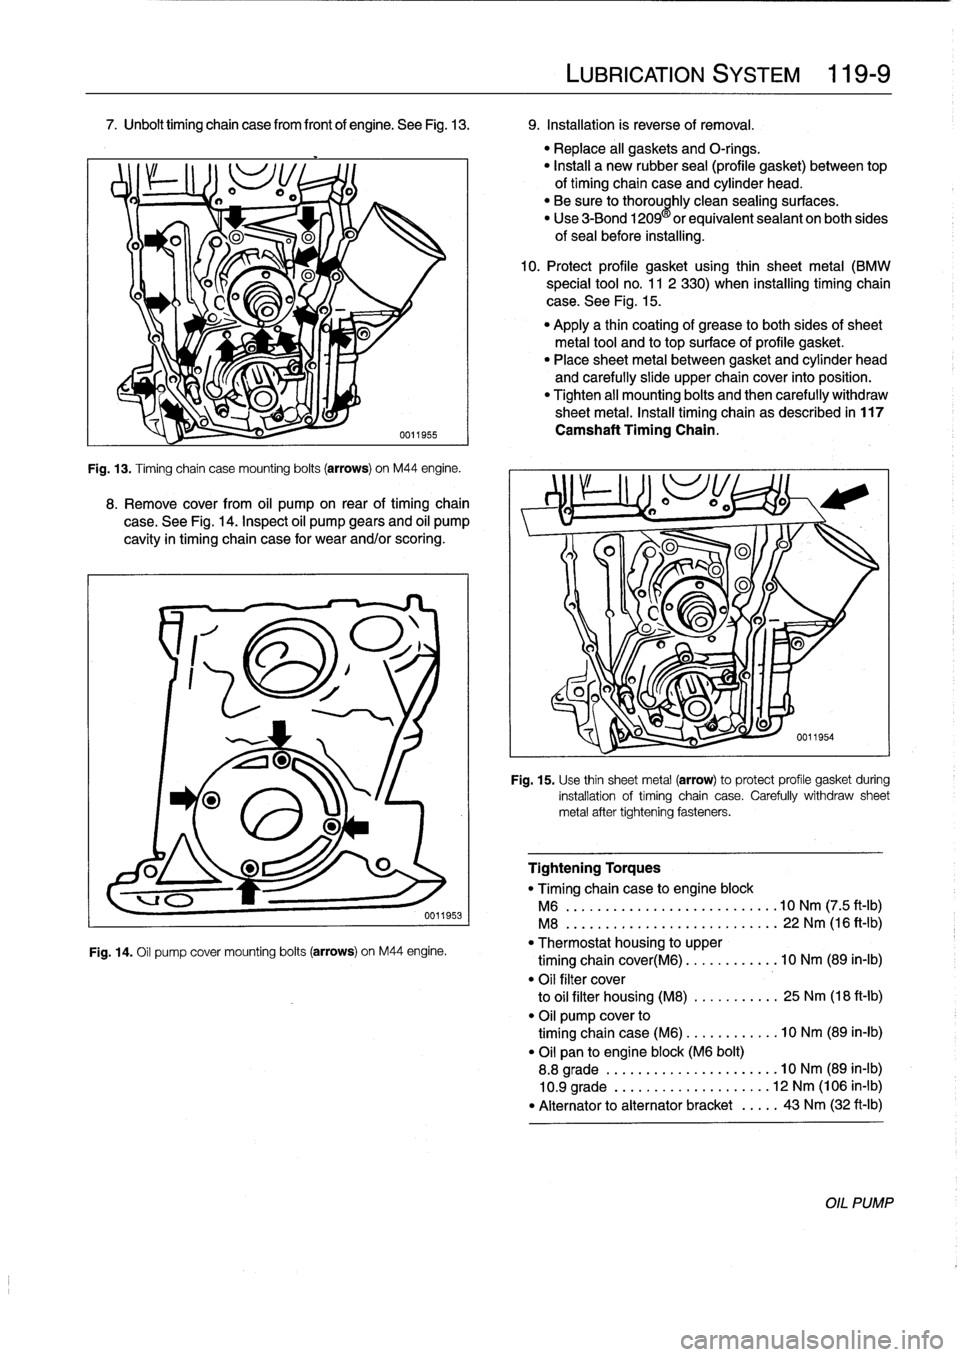 BMW 328i 1998 E36 Workshop Manual 7
.
Unbolt
timing
chain
casefrom
frontof
engine
.
See
Fig
.
13
.

	

9
.
Installation
is
reverse
of
removal
.

Fig
.
13
.
Timing
chain
case
mounting
bolts
(arrows)
on
M44
engine
.

8
.
Remove
cover
fr